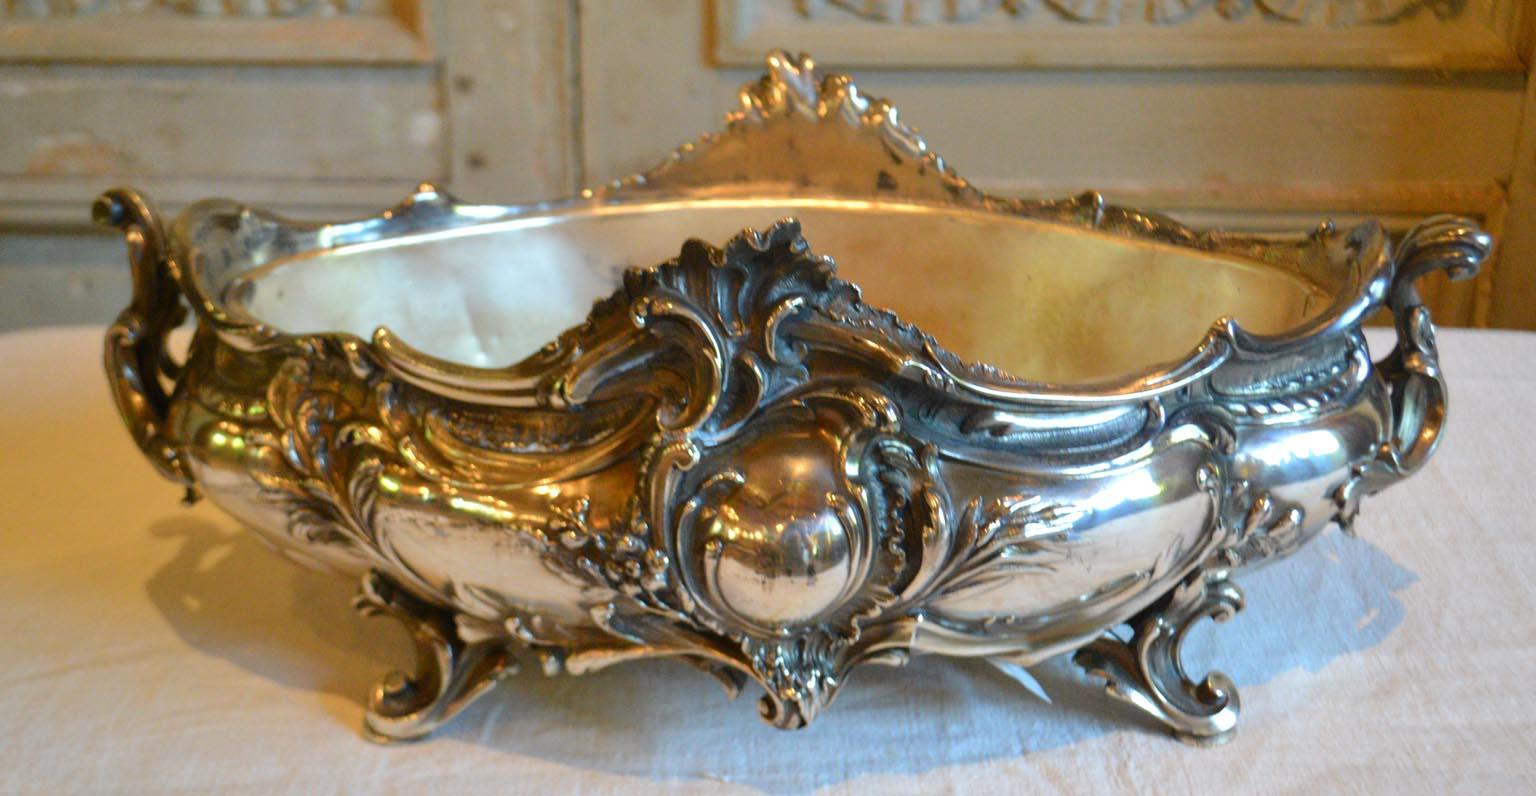 19th century French antique Rococo spelter planter. Embellished with classical Rococo pattern, leaves and floral garland, circa 1880.